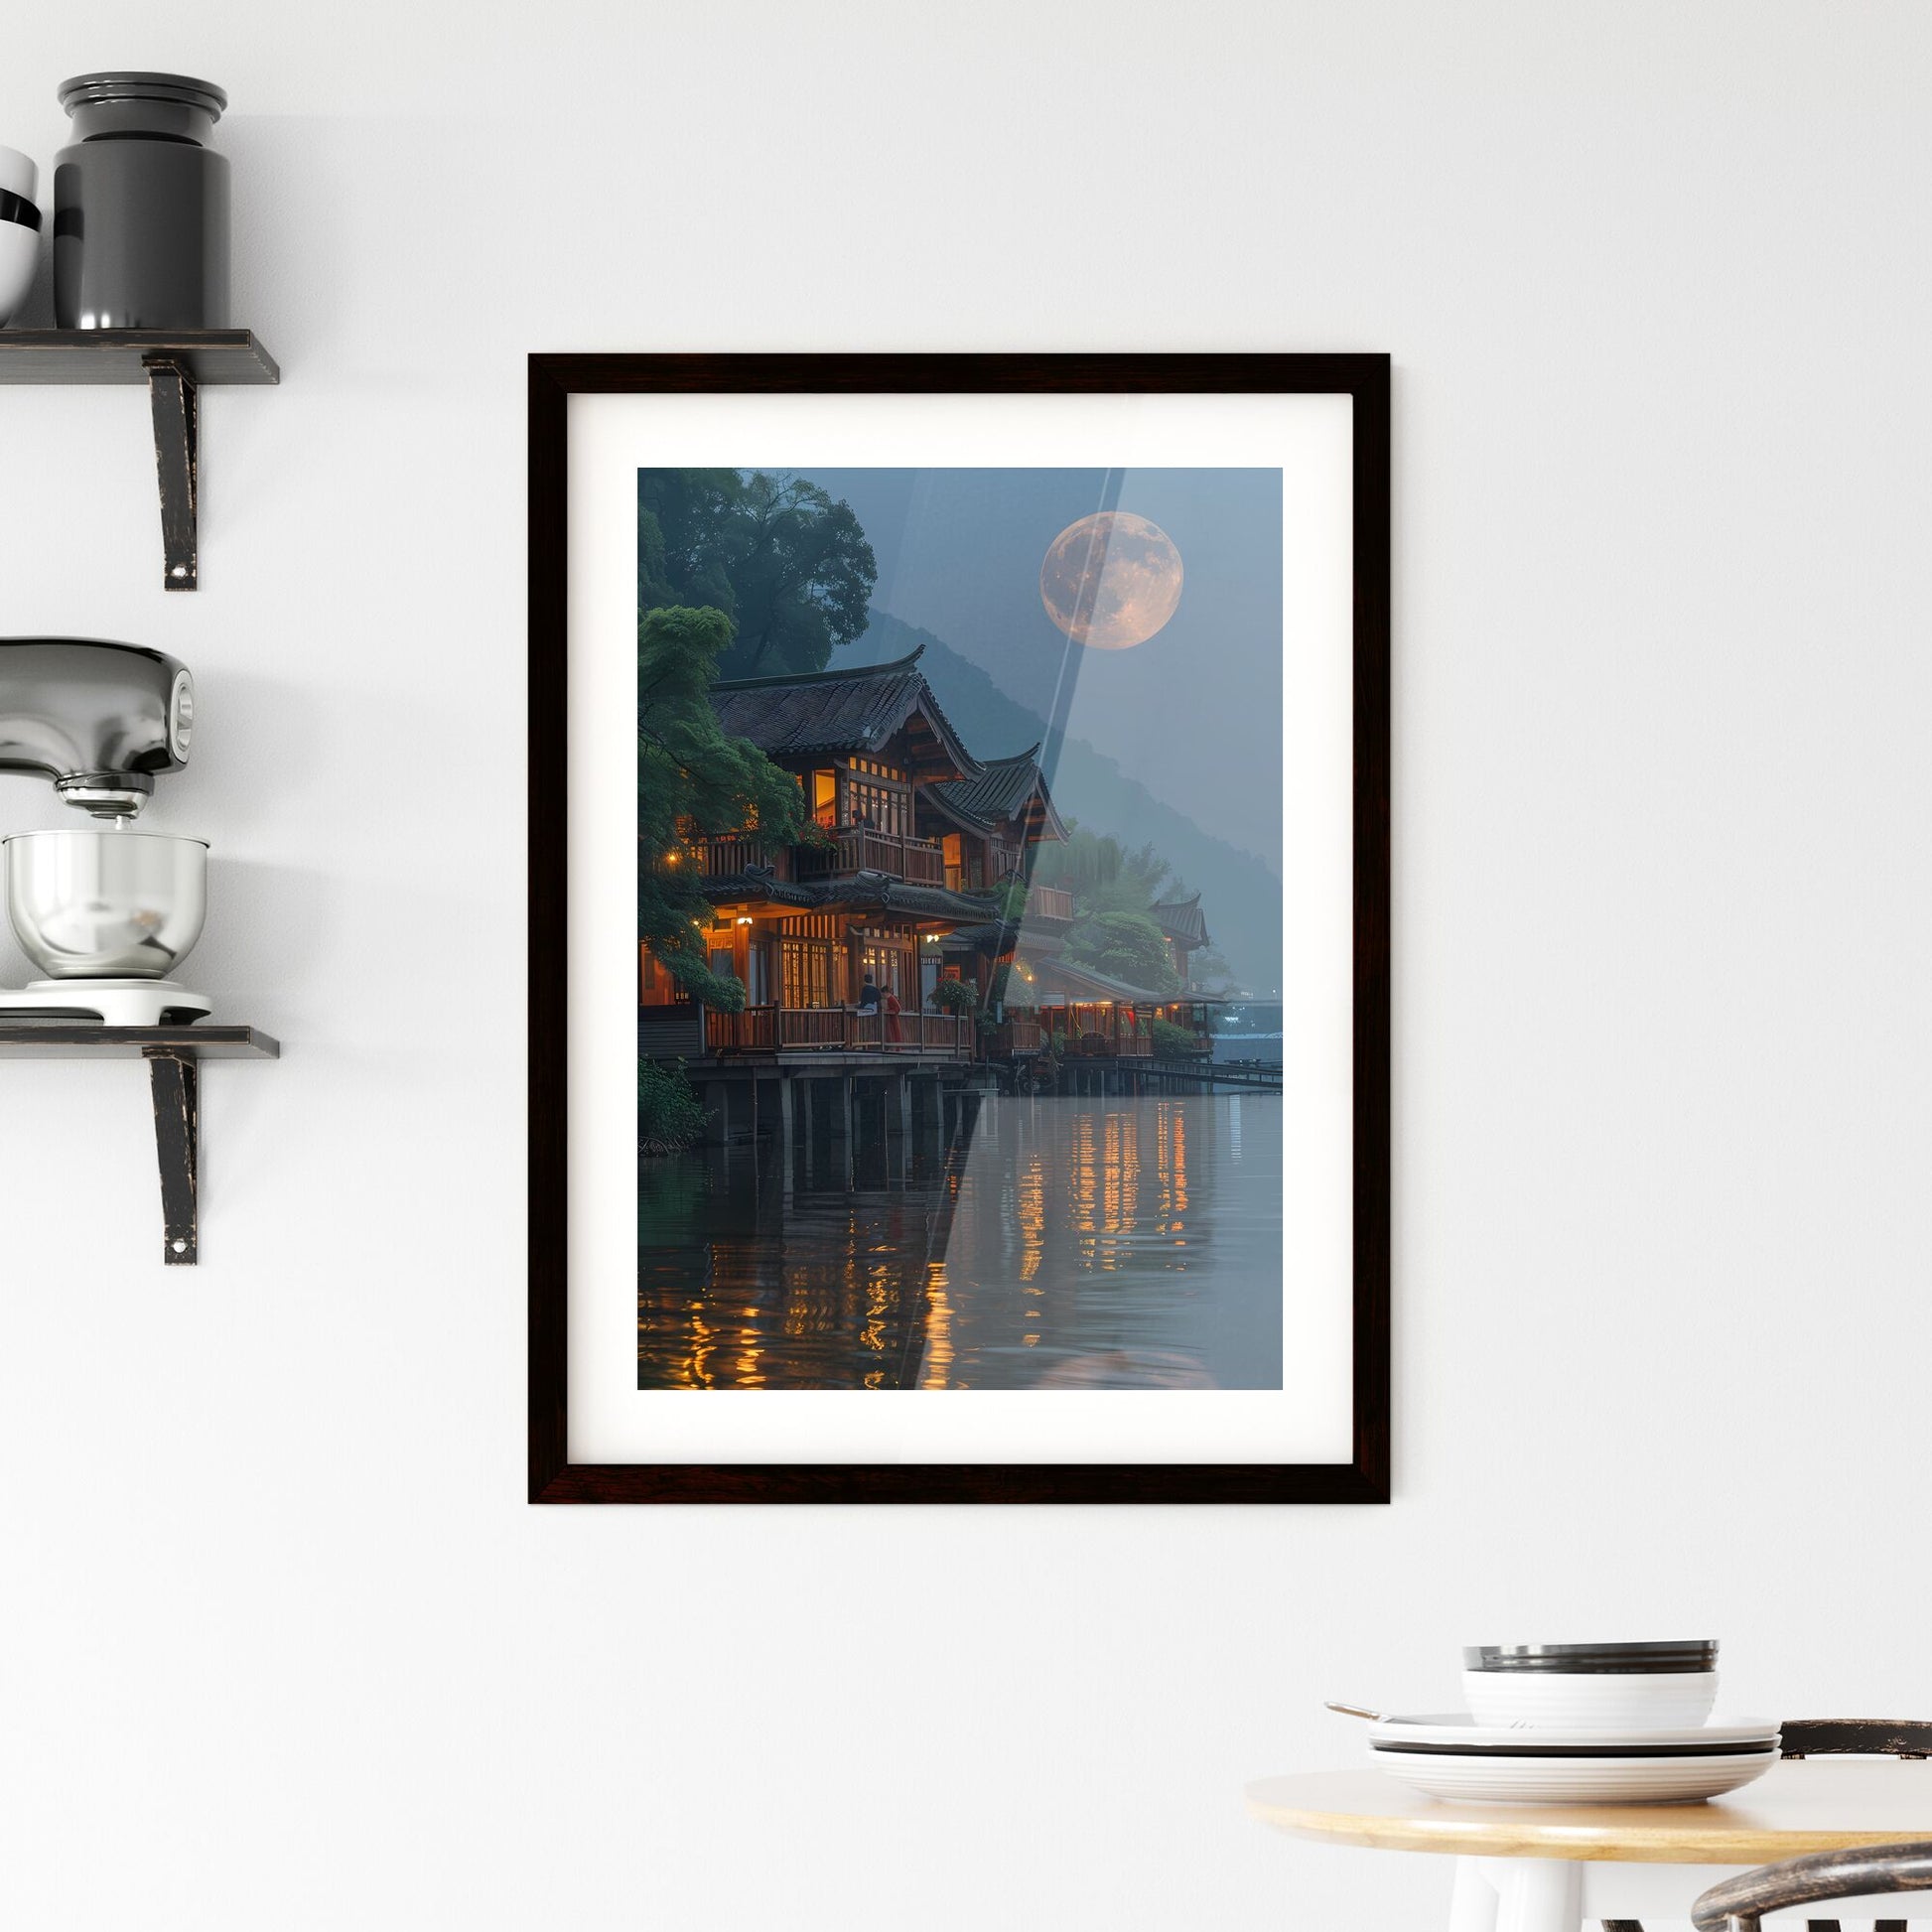 Watercolor Painting of a Secluded Lakeside Cottage with Mountains in the Distance, Minimalist Composition, Award-Winning Photography Default Title